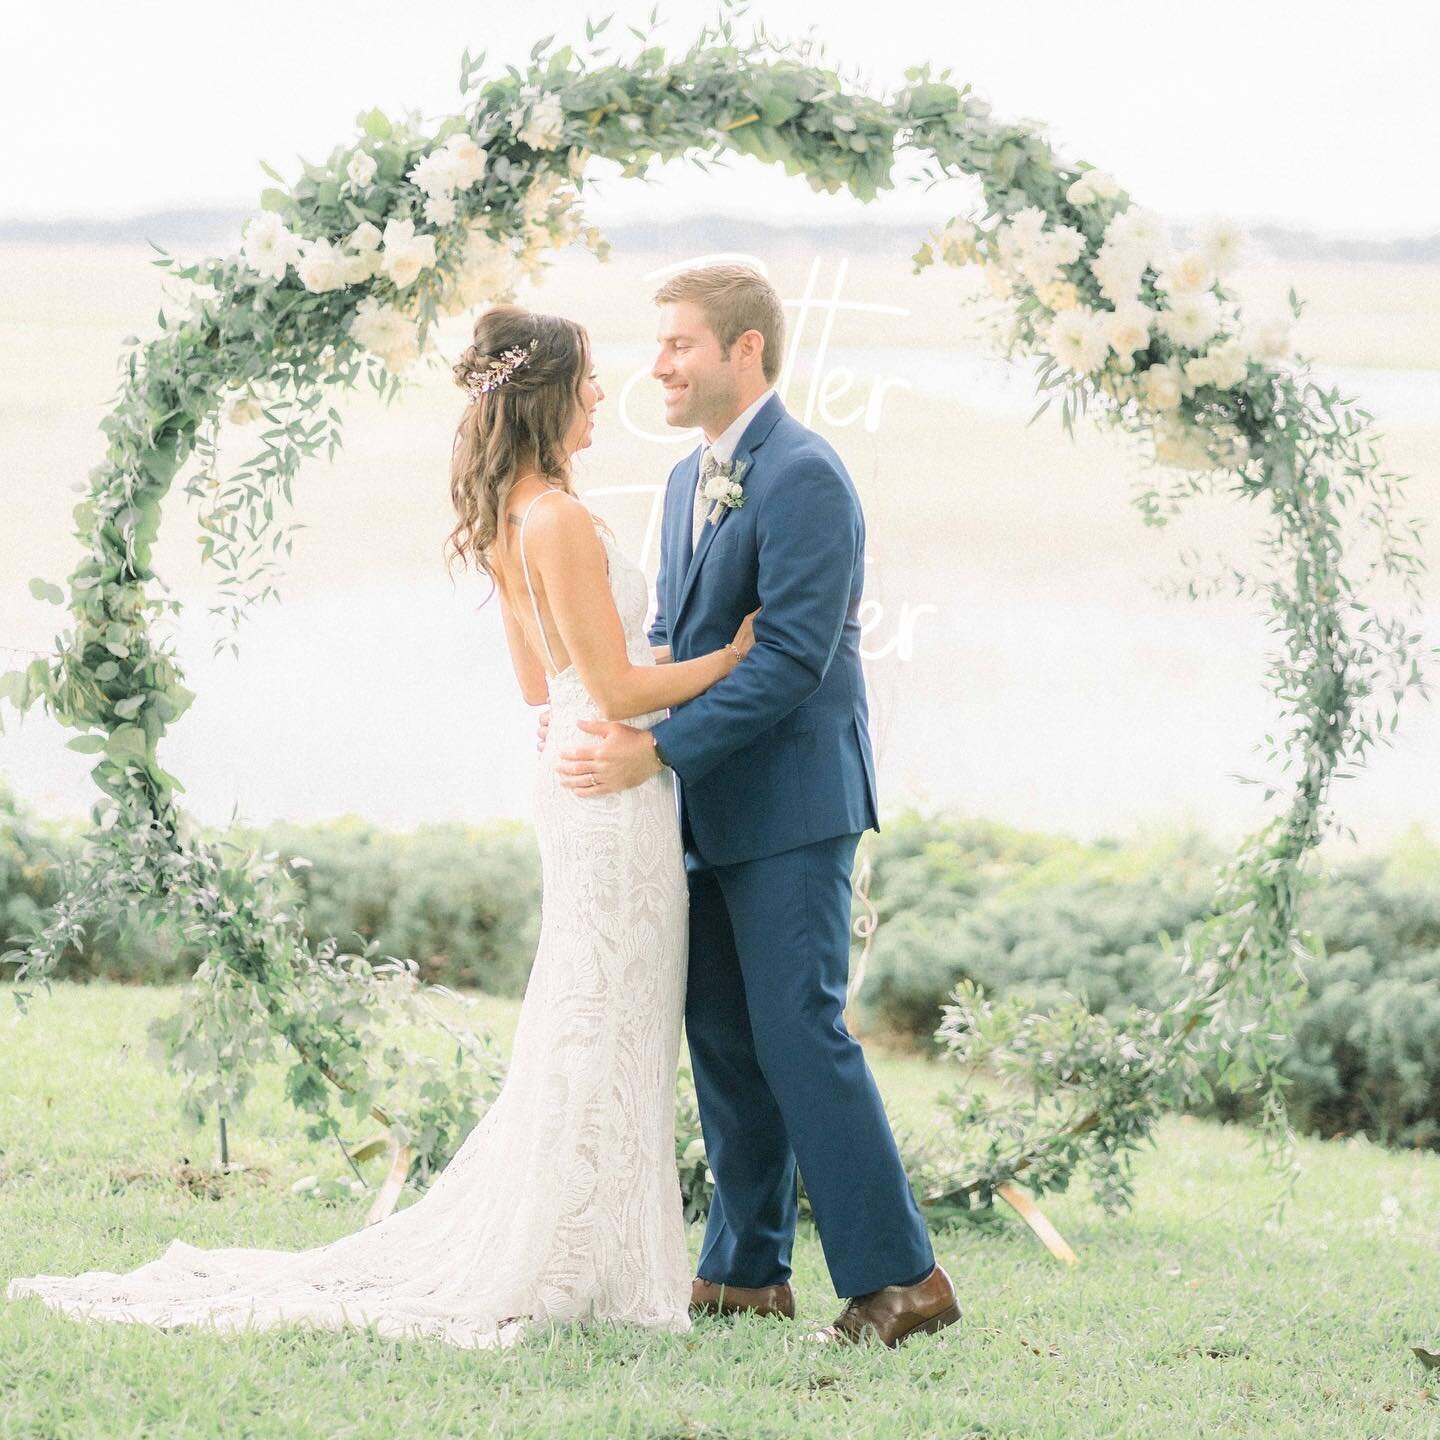 ✨ I just can&rsquo;t!!!! ✨ A picture is truly worth a thousand words. 

I can laugh about the story behind this photograph now. Nicole and Patrick traveled all the way from Louisiana to get married on our beautiful Amelia Island marsh. It was literal